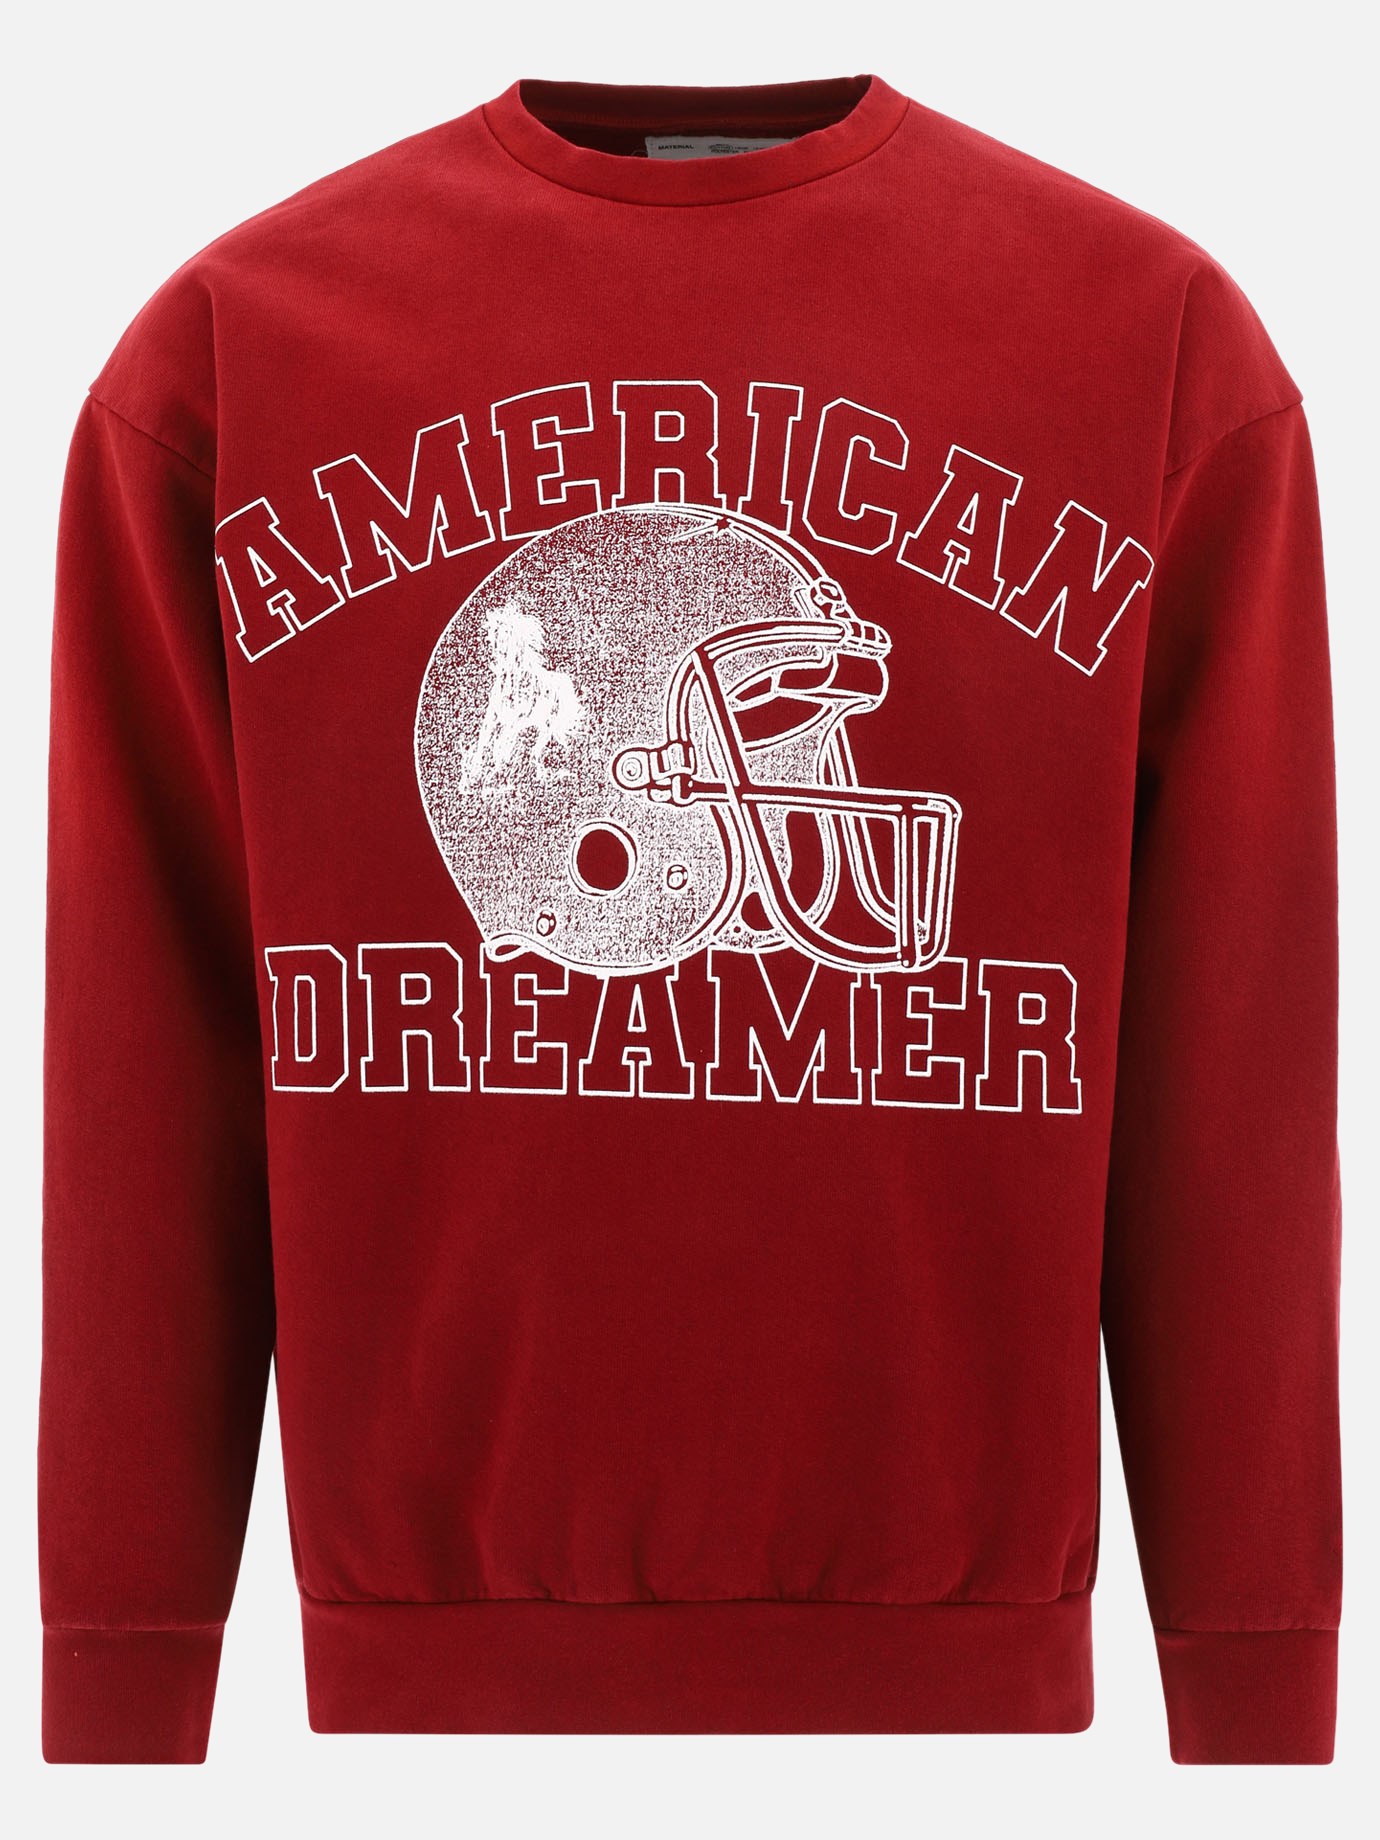  American Dreamer  sweatshirtby One Of These Days - 0